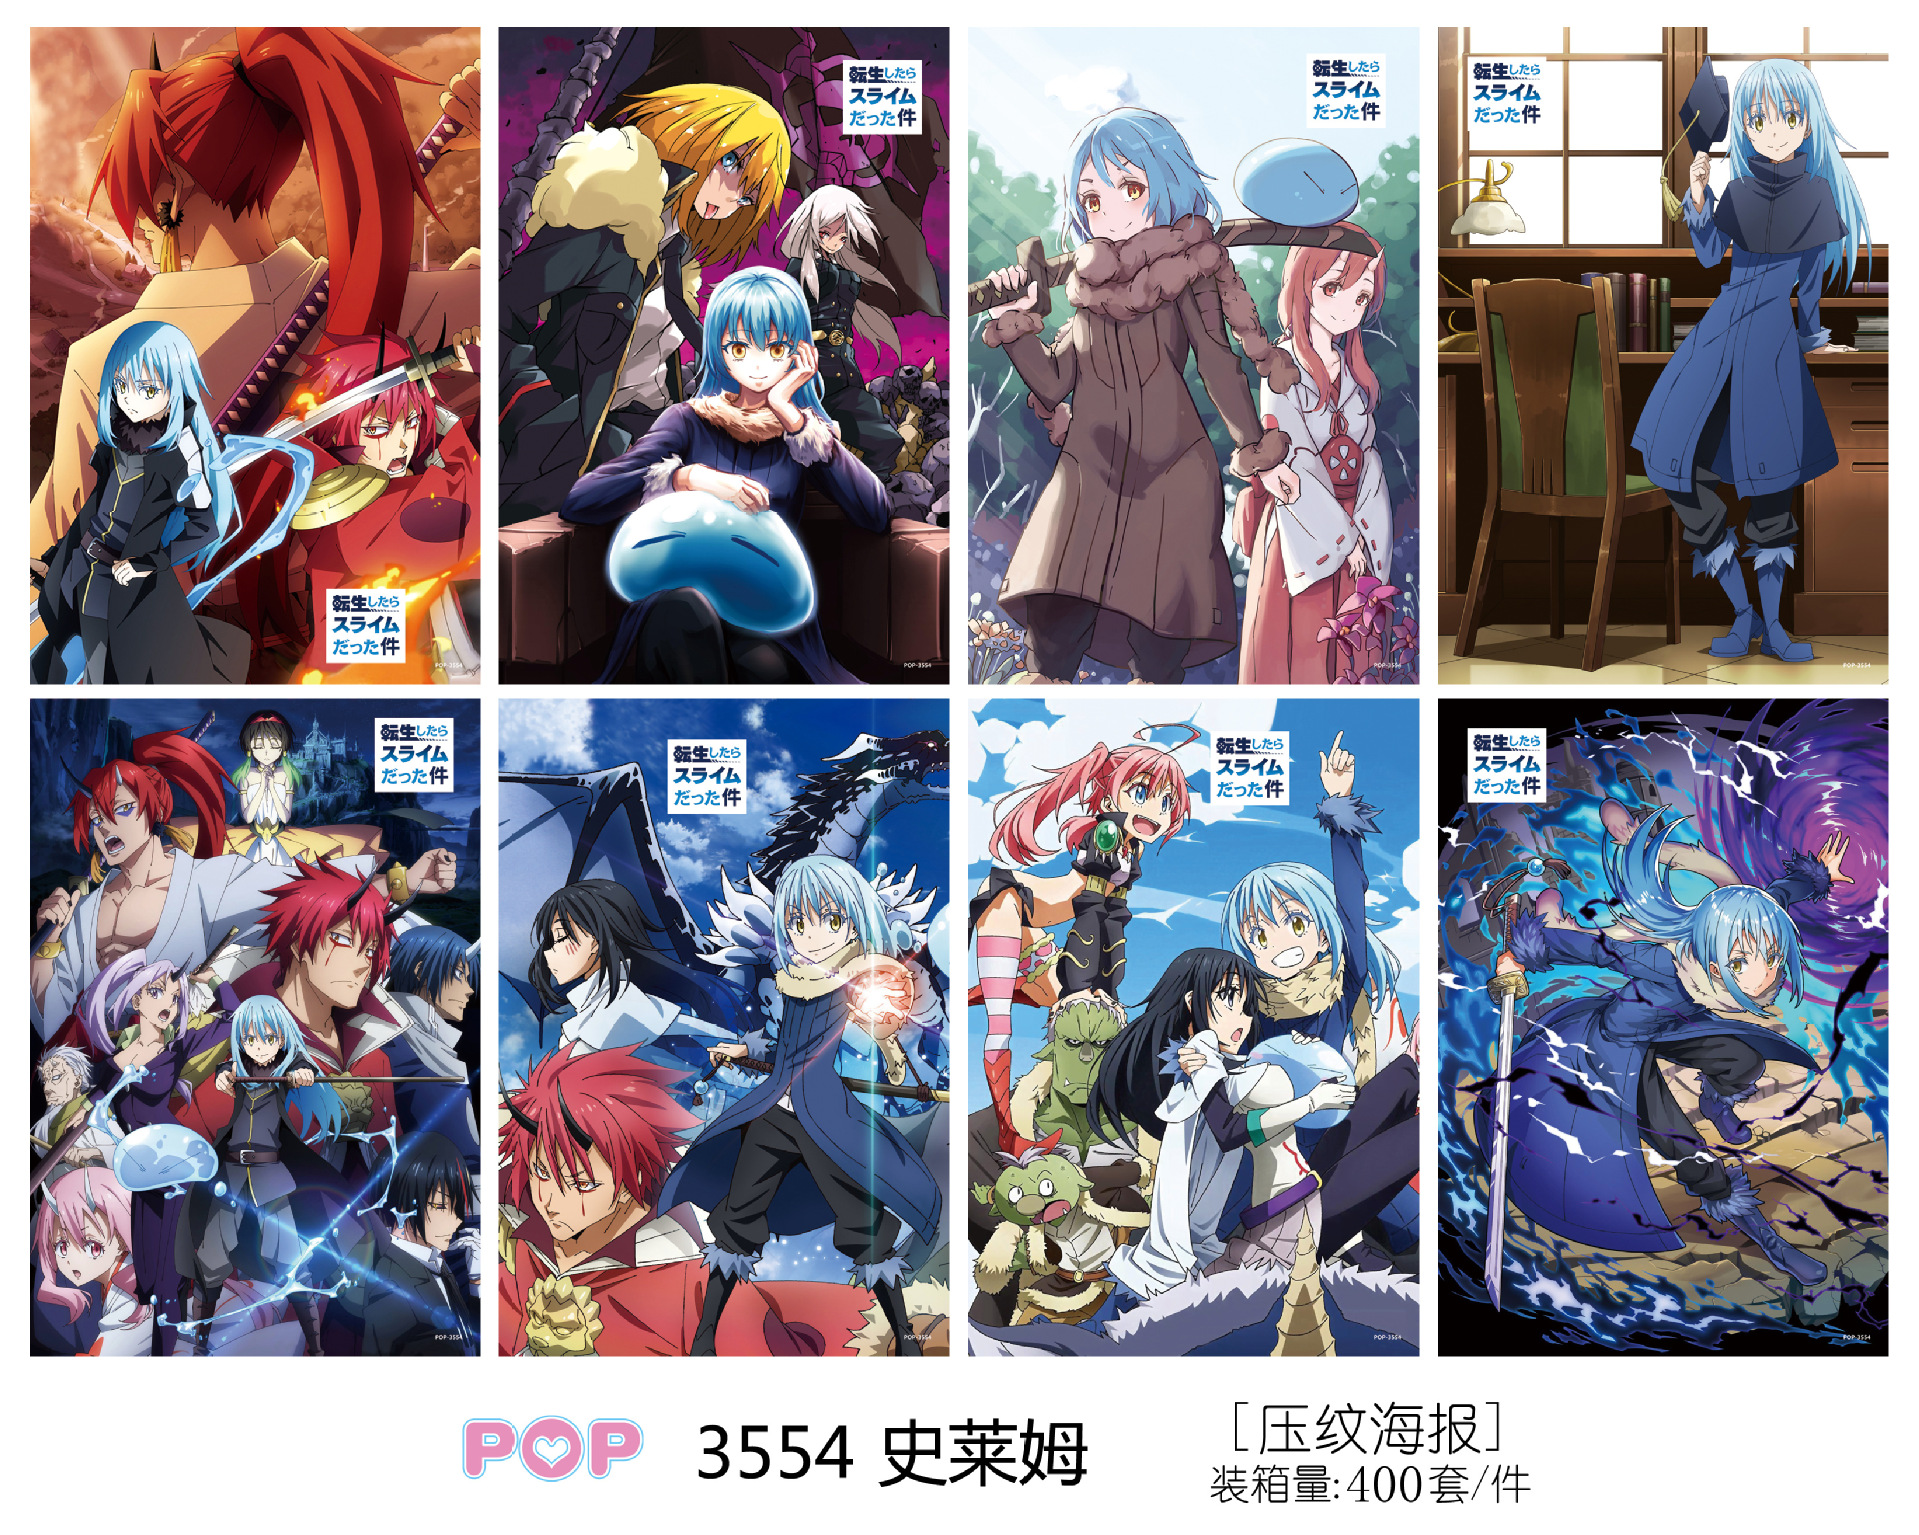 That Time I Got Reincarnated as a Slime anime poster price for a set of 8 pcs